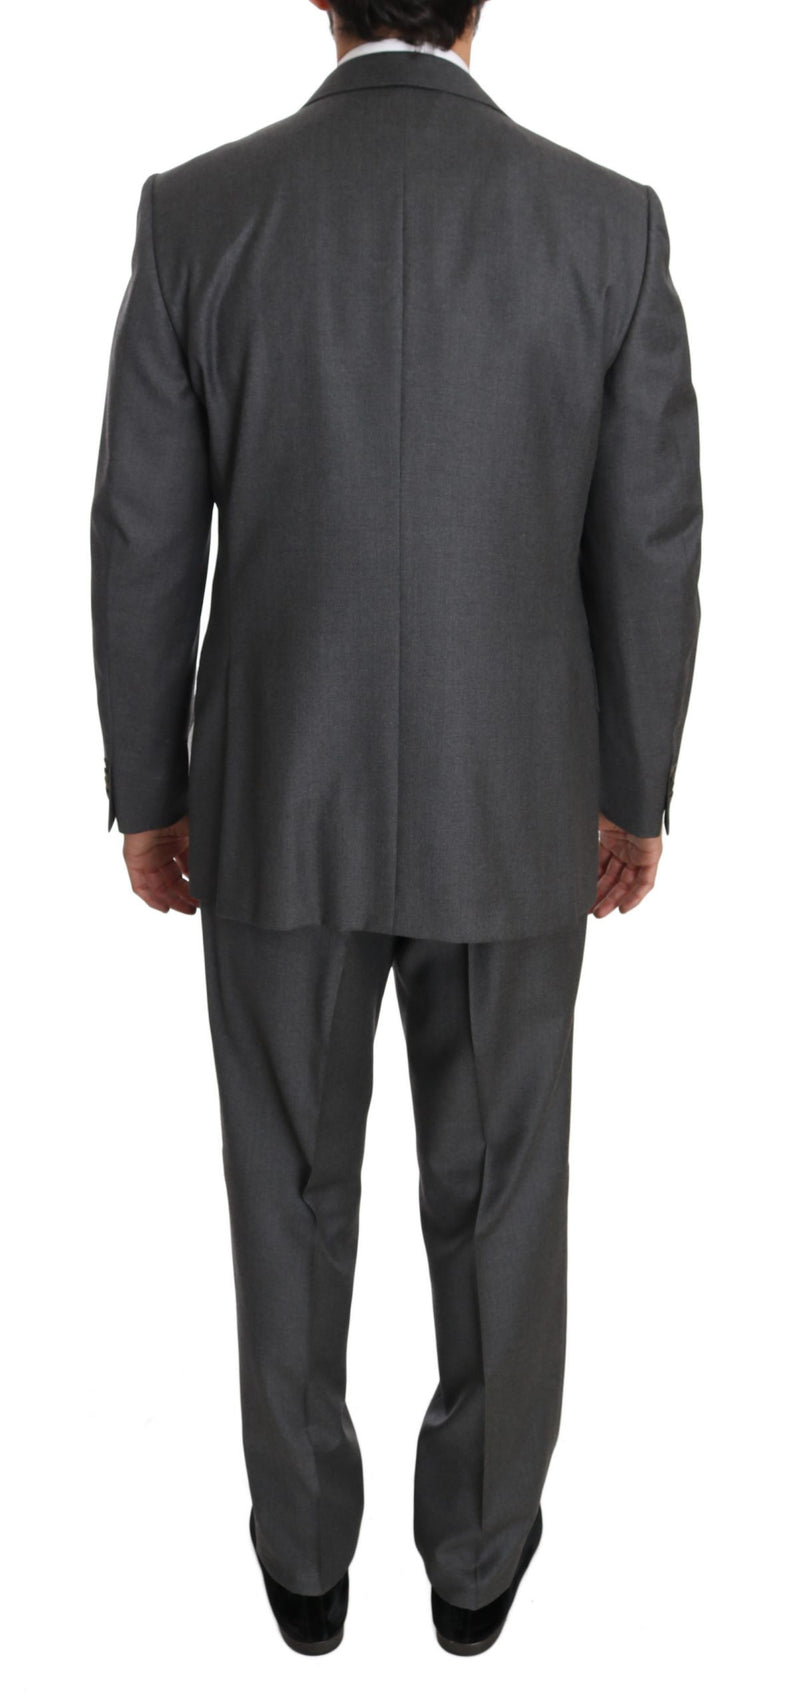 Gray Solid 2 Piece 3 Button Wool Suit